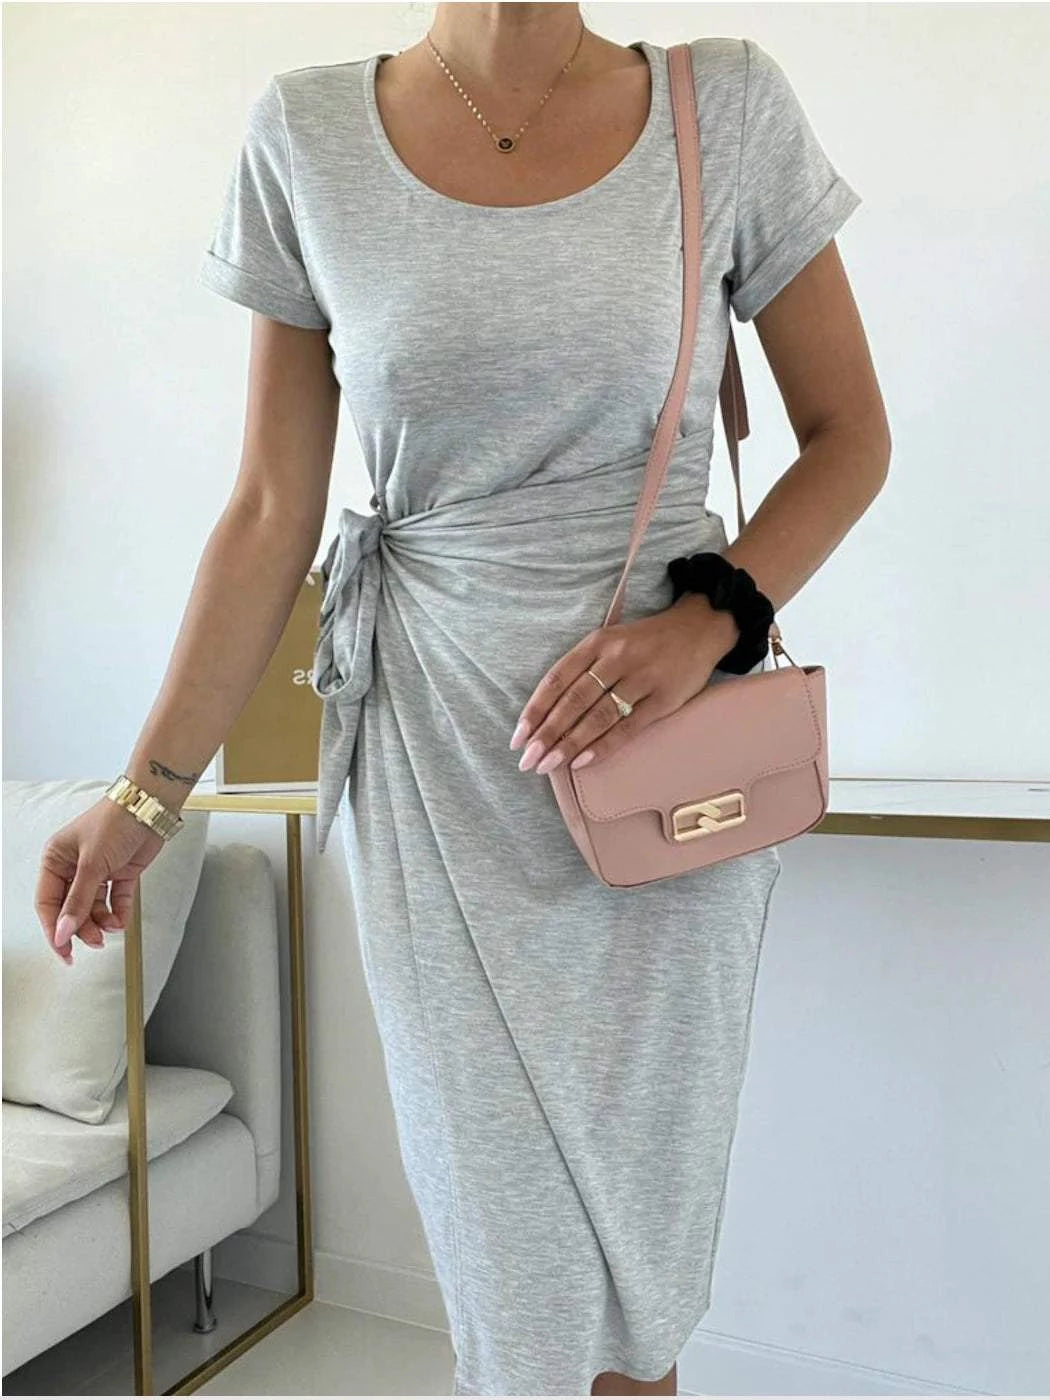 Women's Soft Gray Dress - ToroModa  https://www.toromoda.com/products/womens-soft-gray-dress  Gentle women's dress of medium length, clean silhouette, spectacular cut with a cover in the front, tying the waist with a belt.Fabric: cotton with elastane.